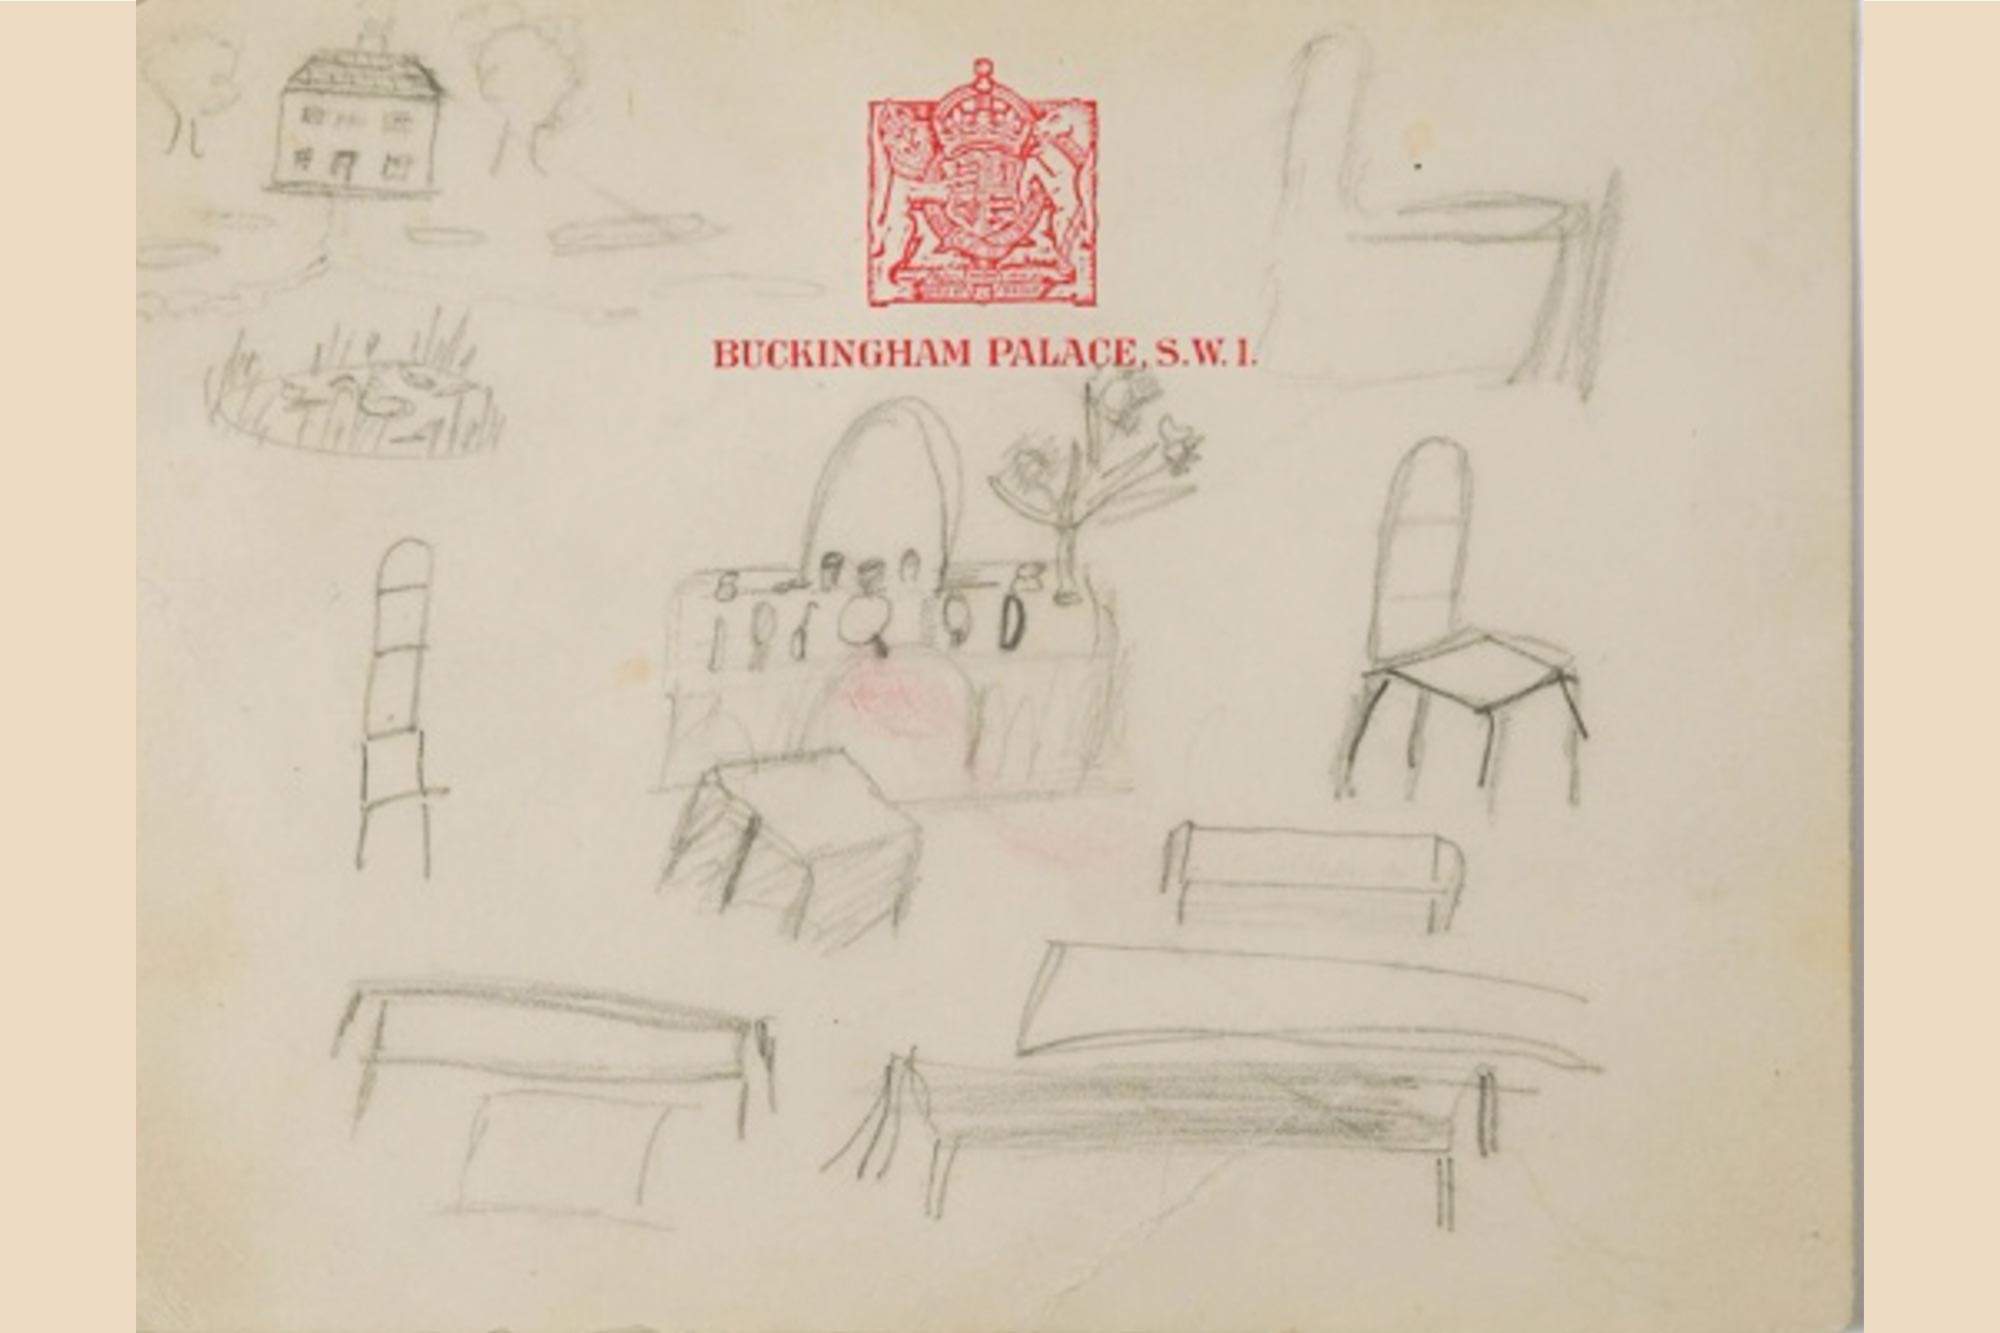 Dentist to auction sketches by young Queen Elizabeth II